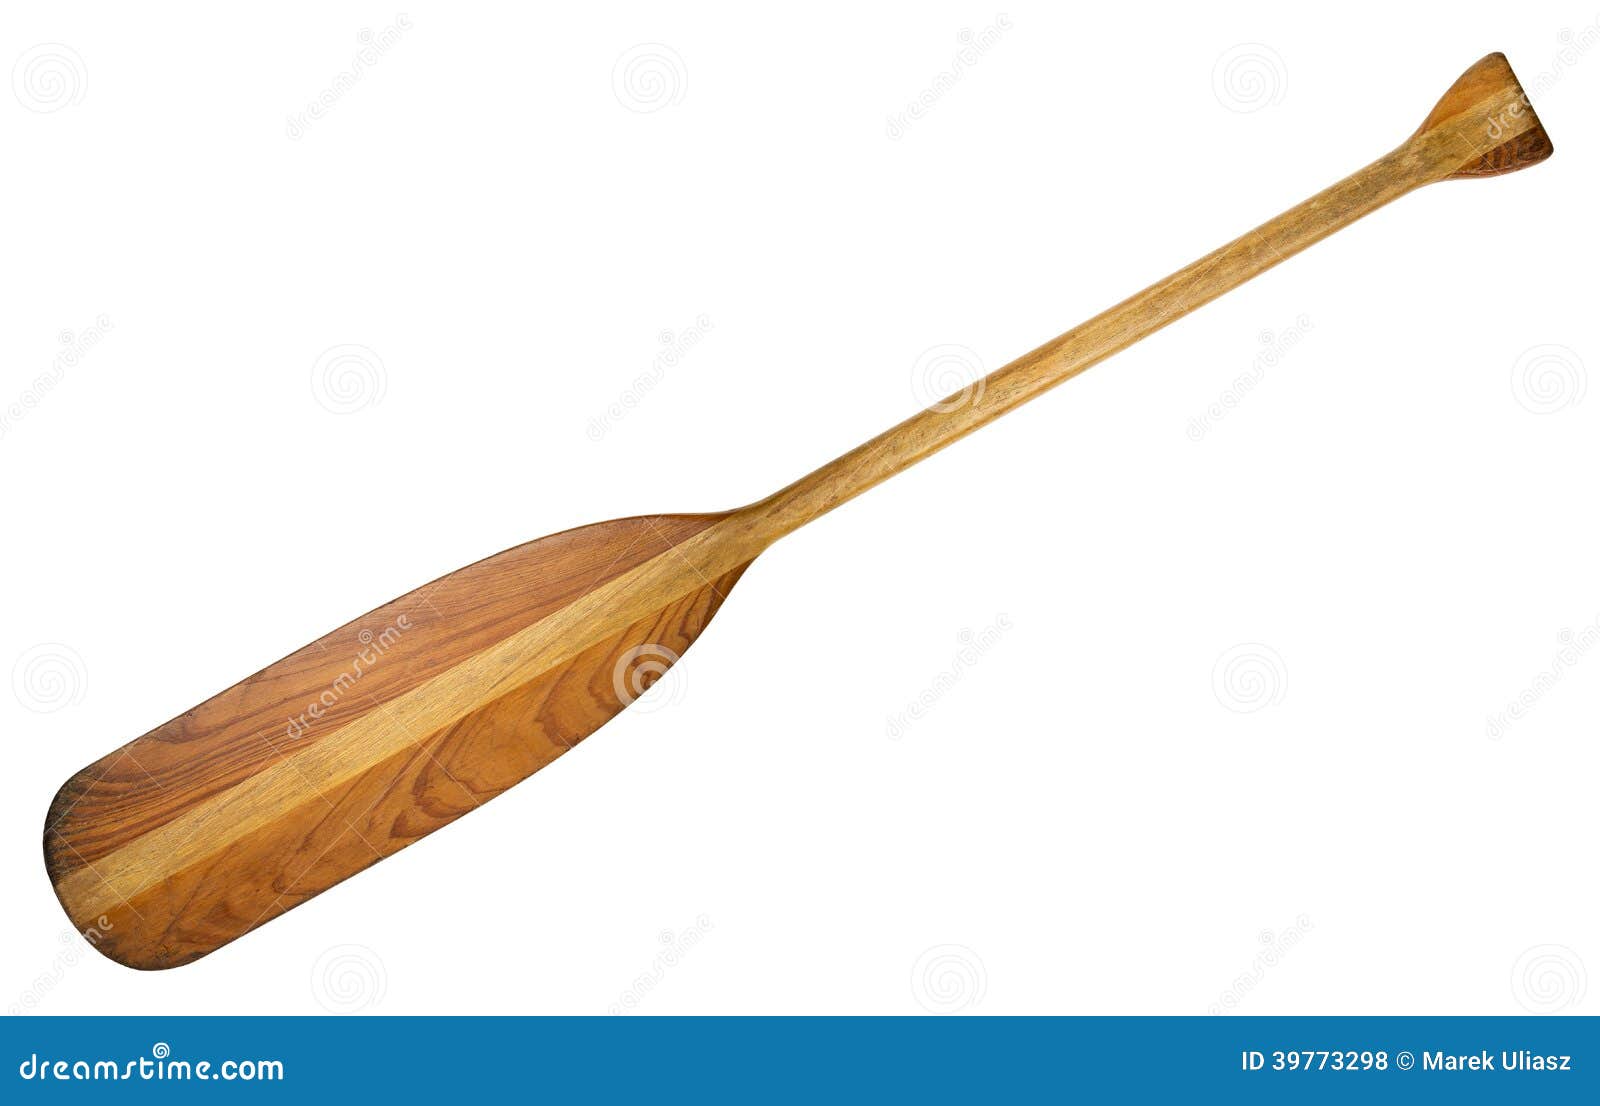 Wooden canoe paddle stock photo. Image of scratched 